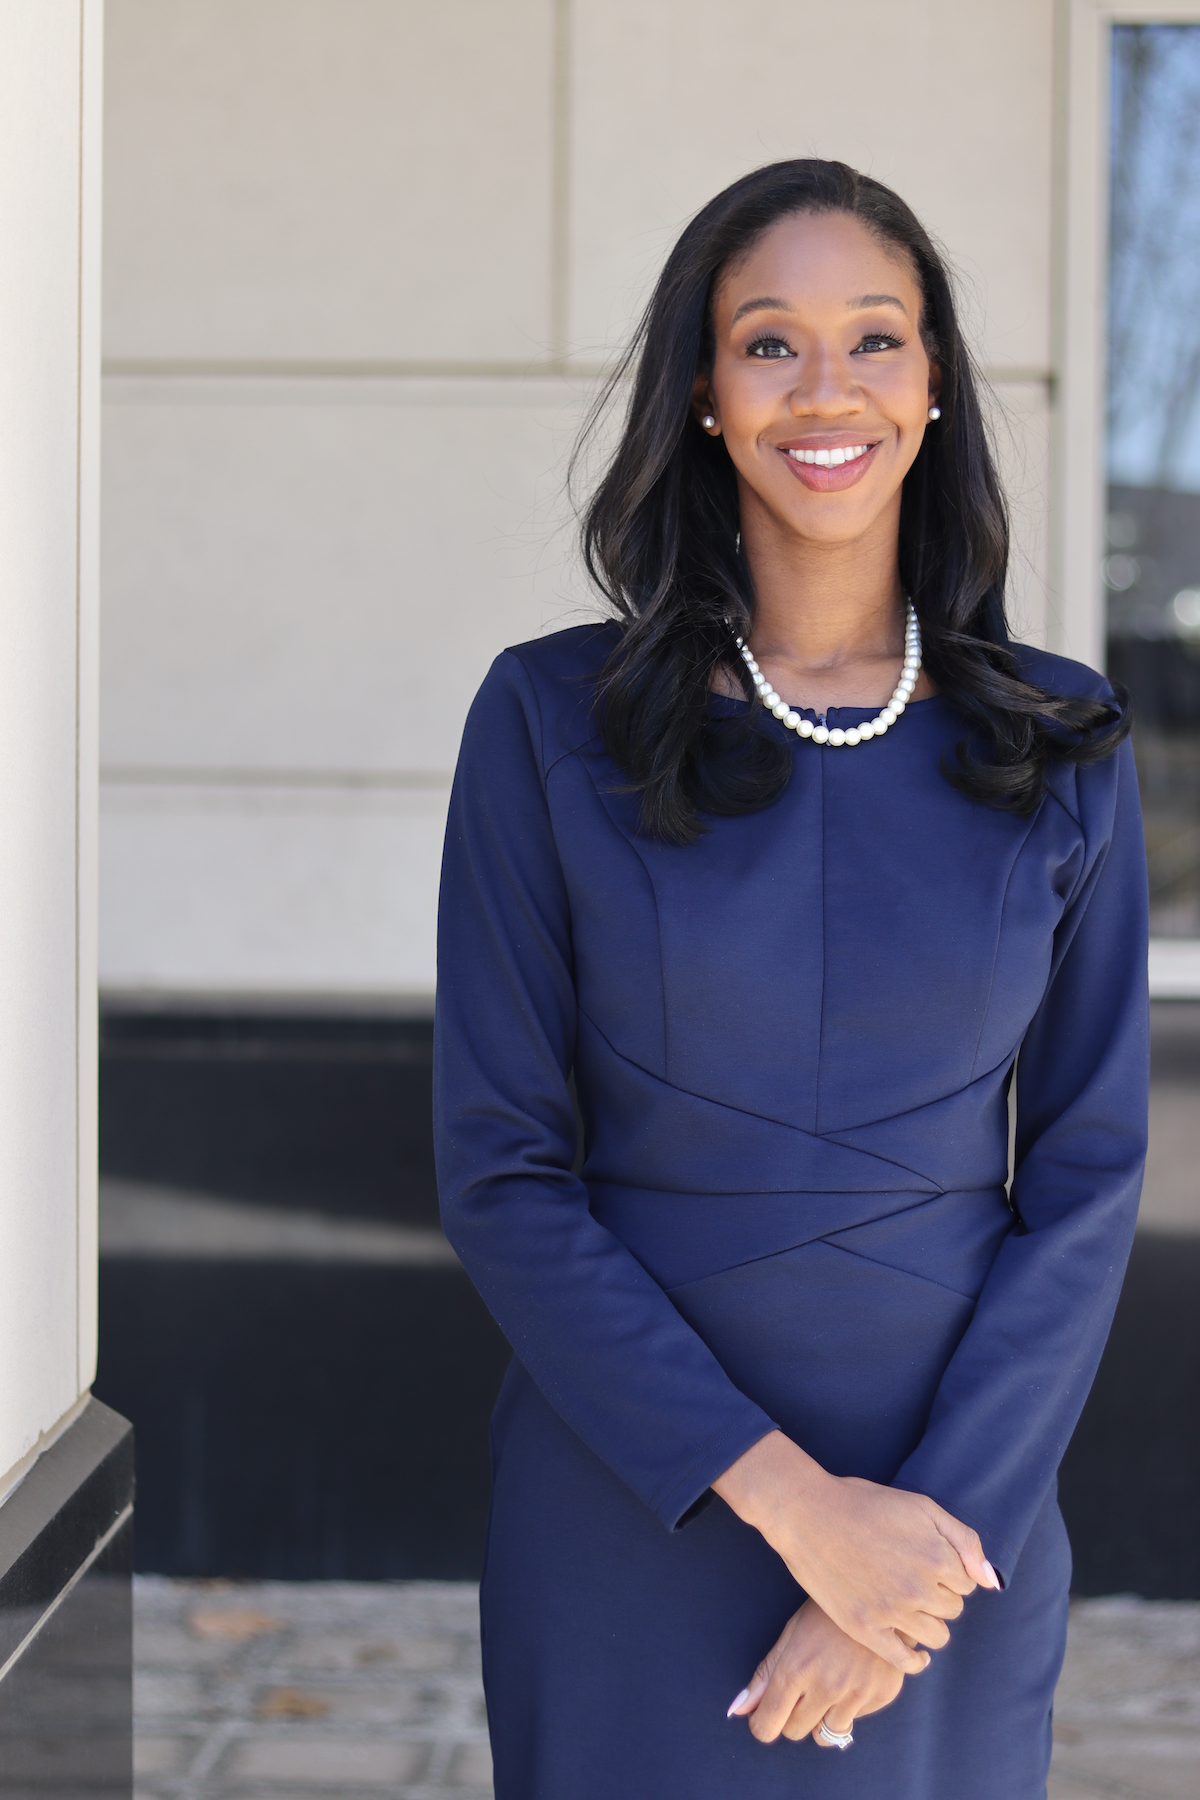 Rep. Kyra Harris Bolden appointed to Michigan Supreme Court by Gov. Gretchen Whitmer